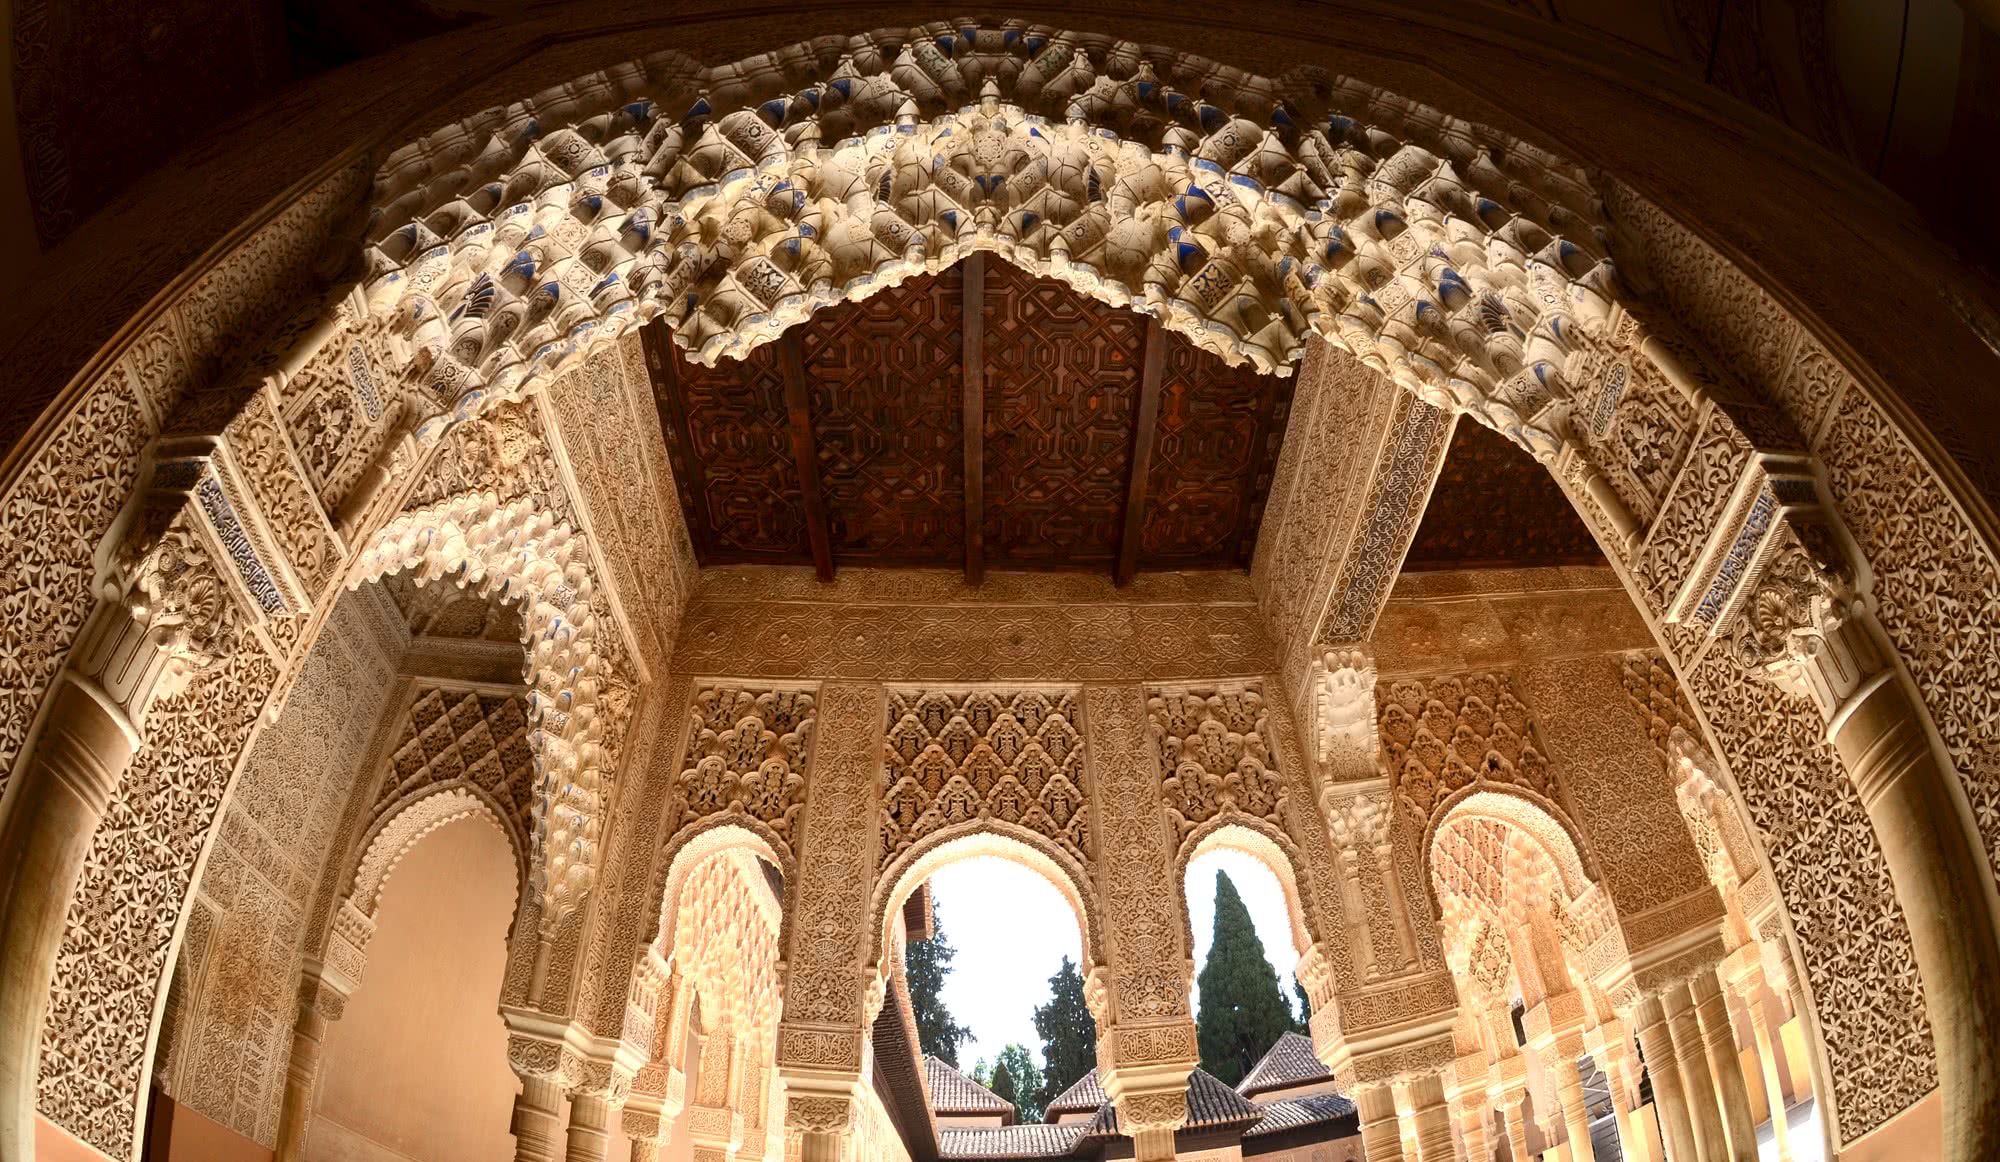 Where and how to get a ticket to visit the Alhambra - Ticket sale -  